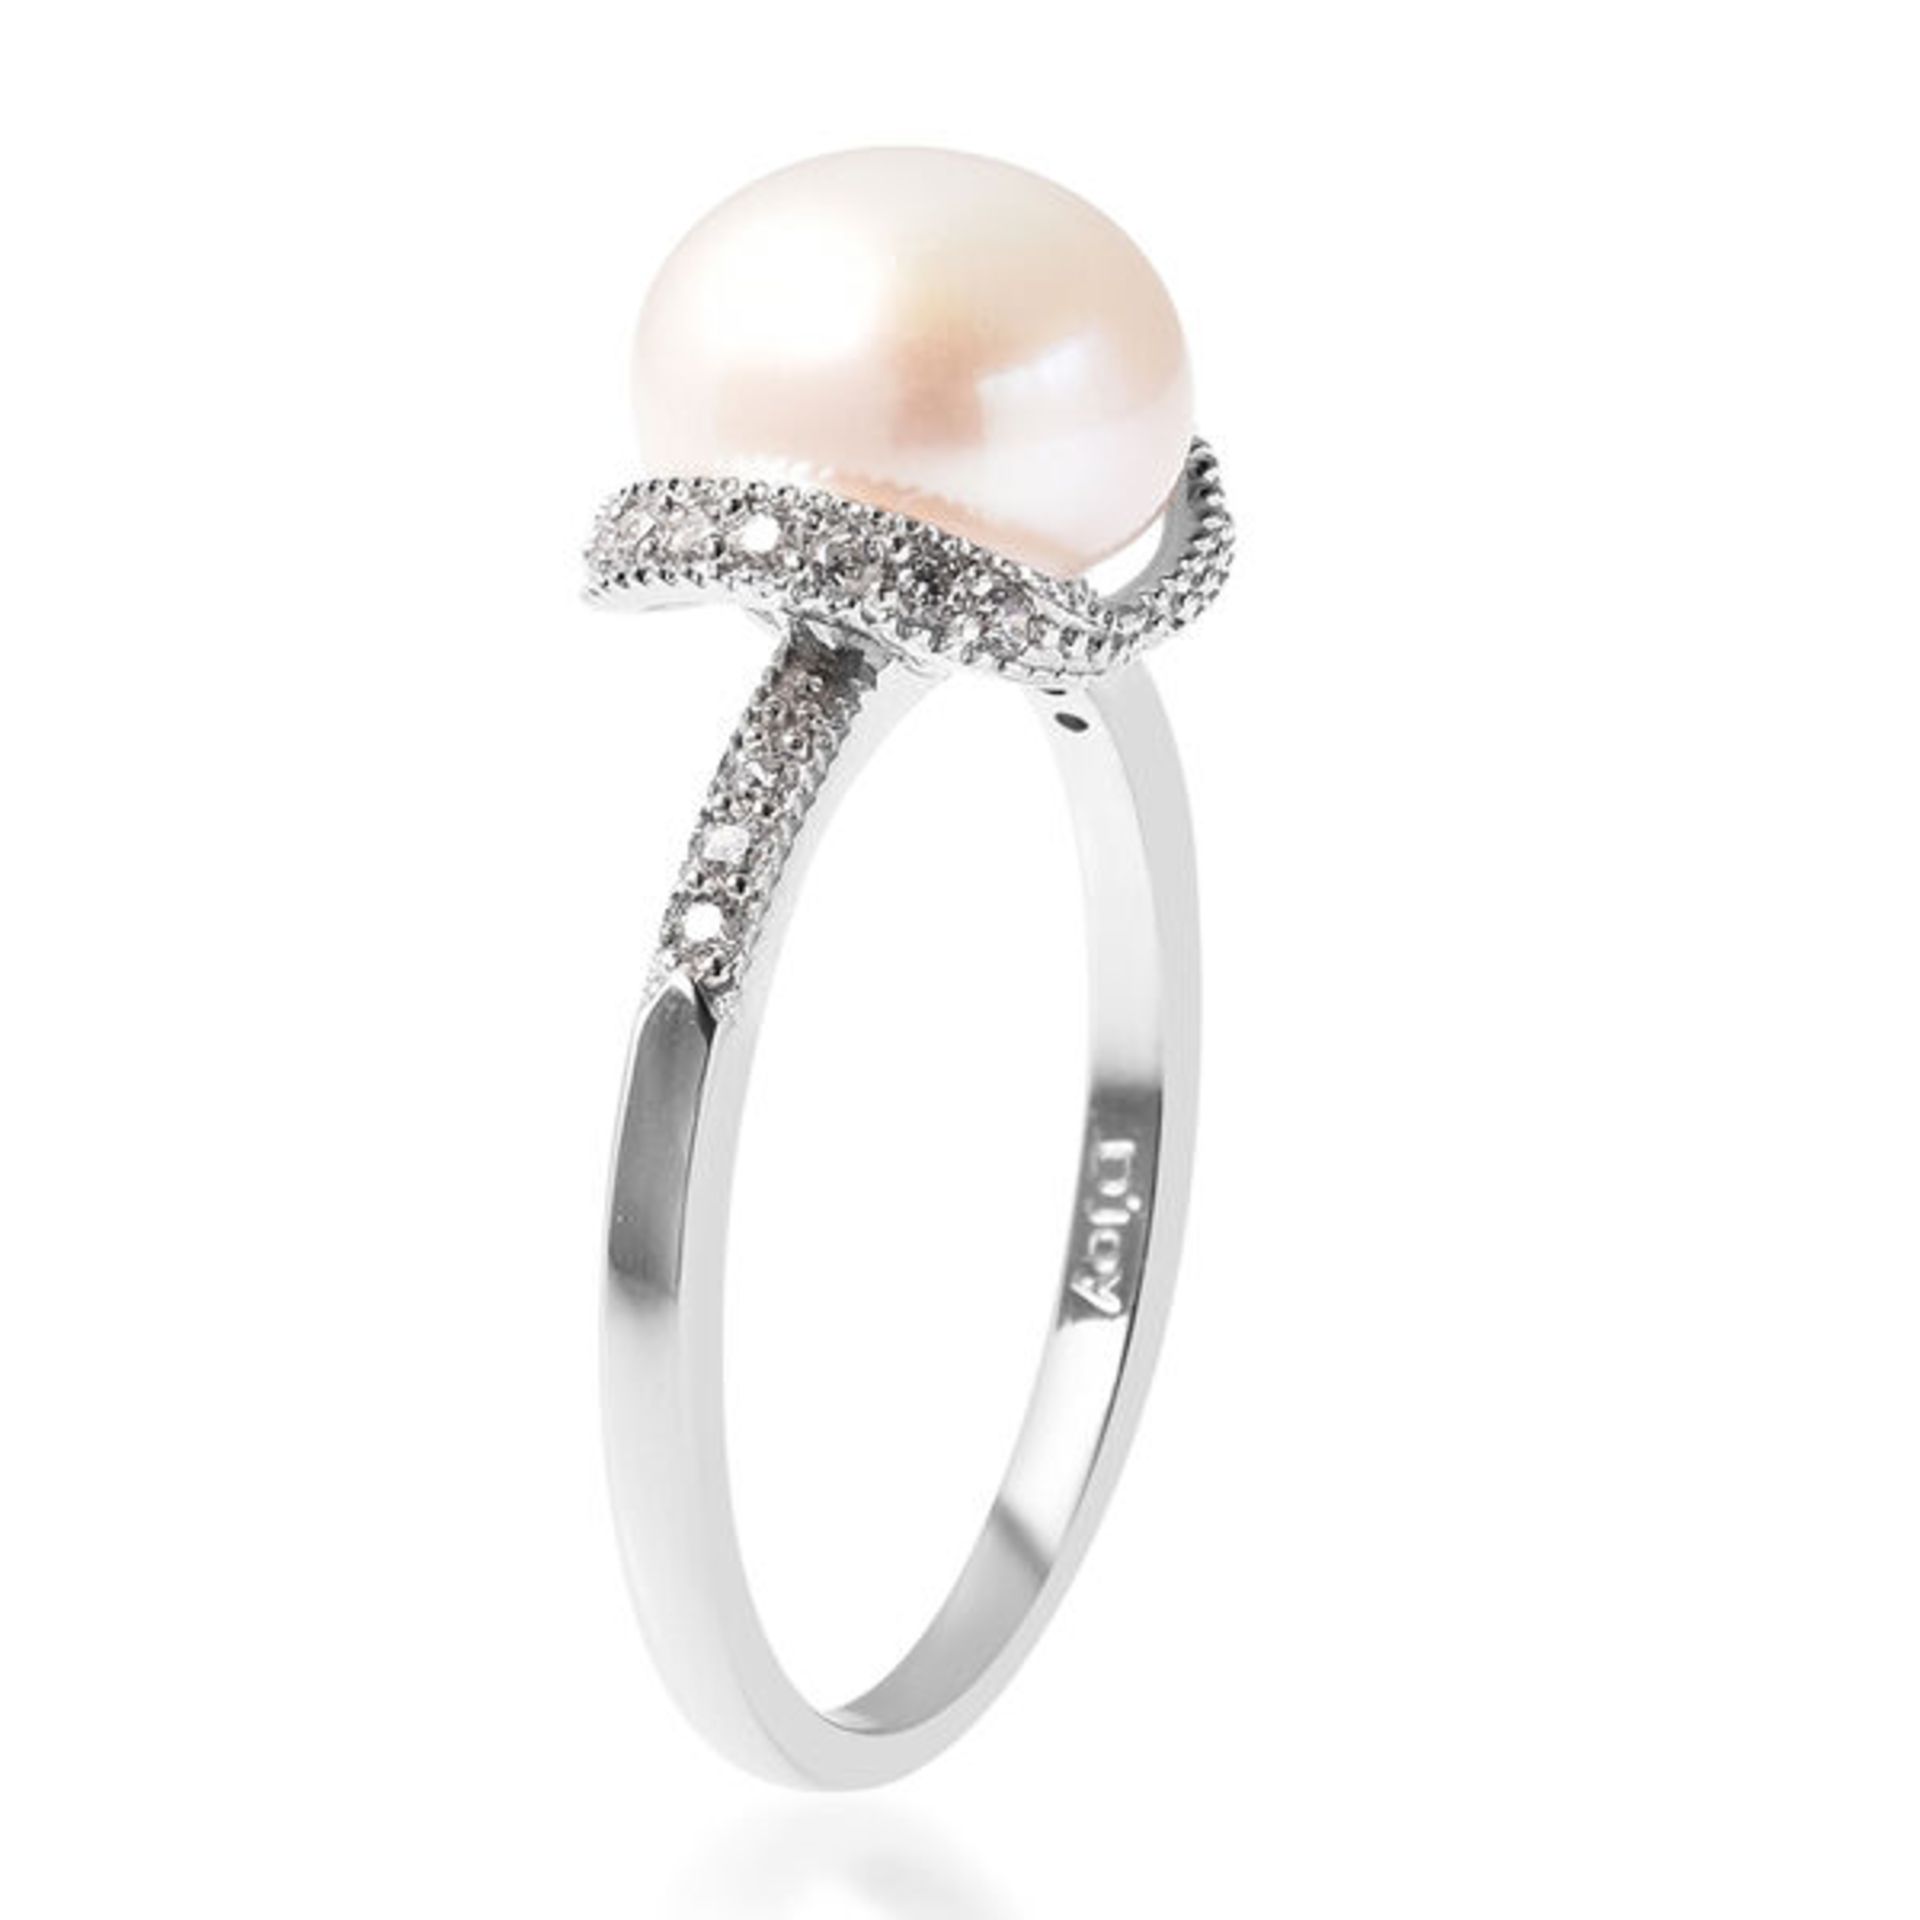 NEW!! Freshwater White Pearl and Simulated Diamond Ring in Rhodium Overlay - Image 2 of 3